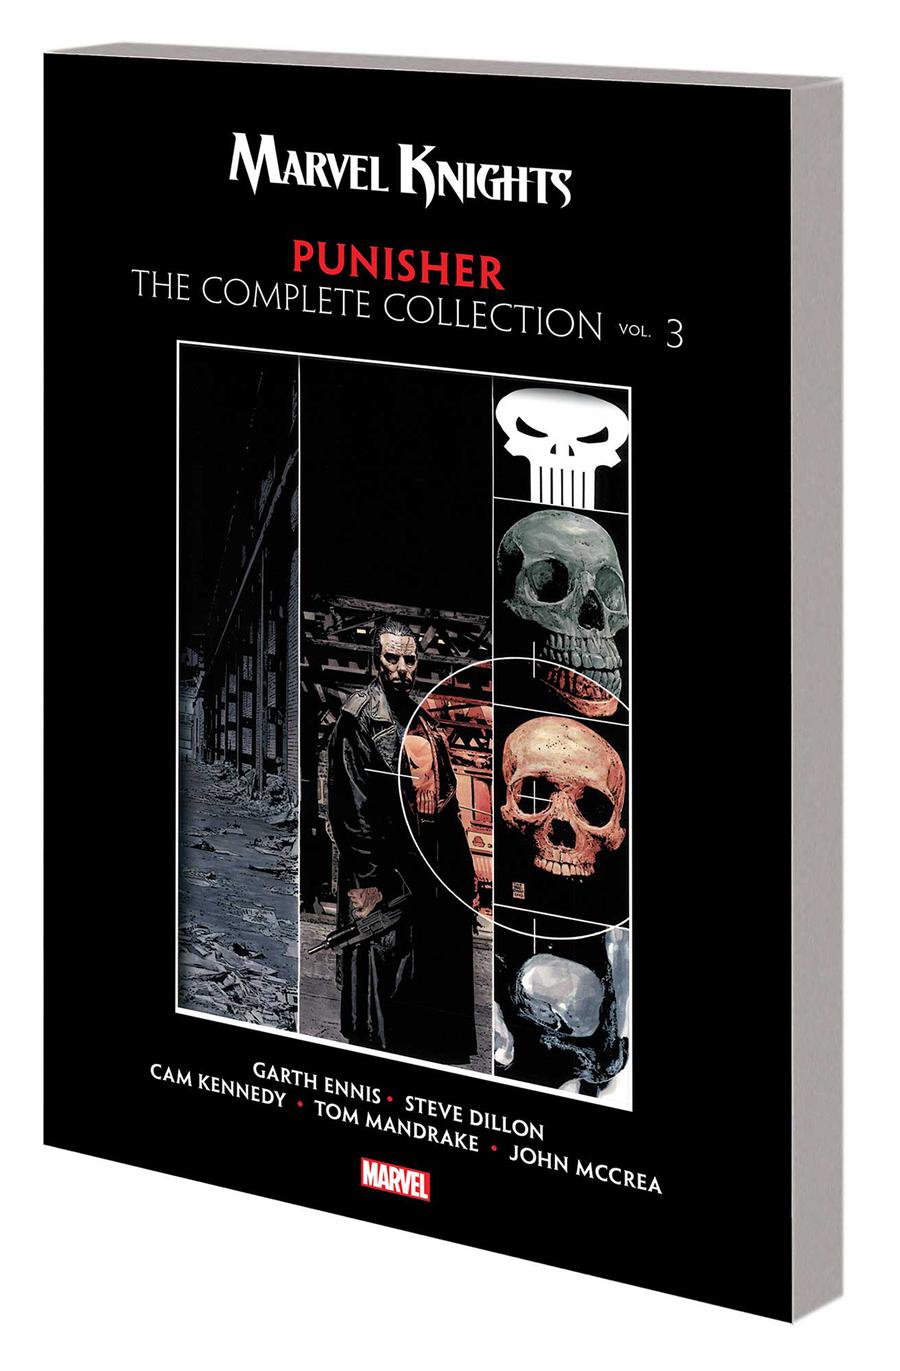 Marvel Knights Punisher By Garth Ennis Complete Collection Vol 3 TP